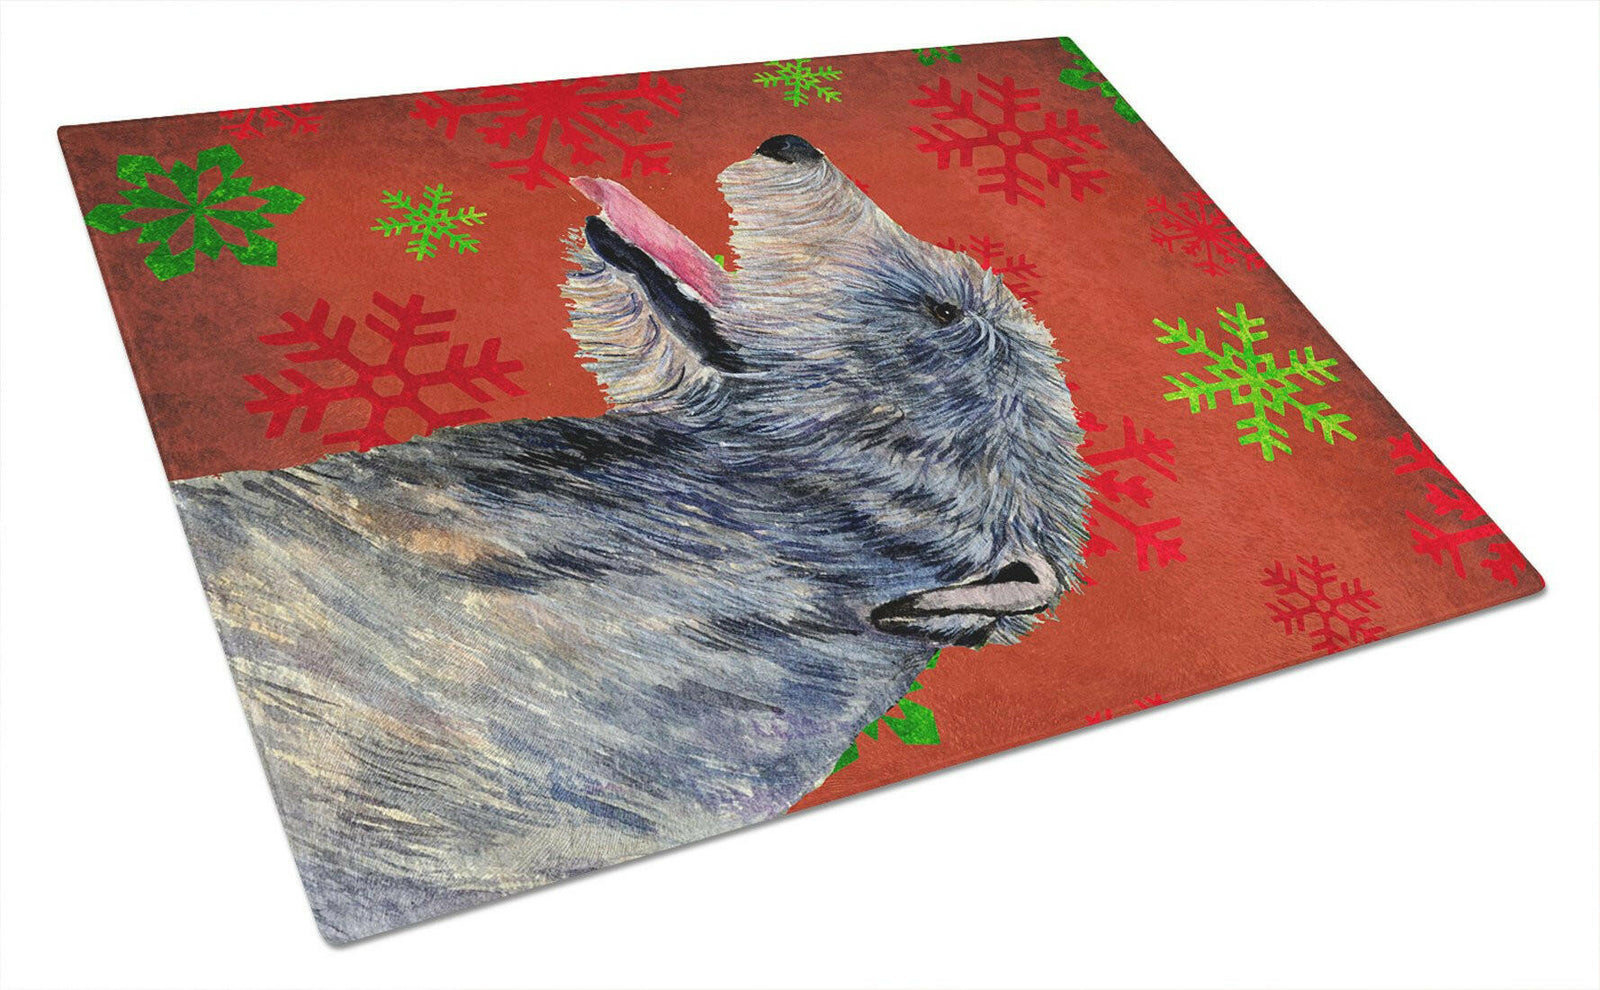 Irish Wolfhound Red and Green Snowflakes Christmas Glass Cutting Board Large by Caroline's Treasures